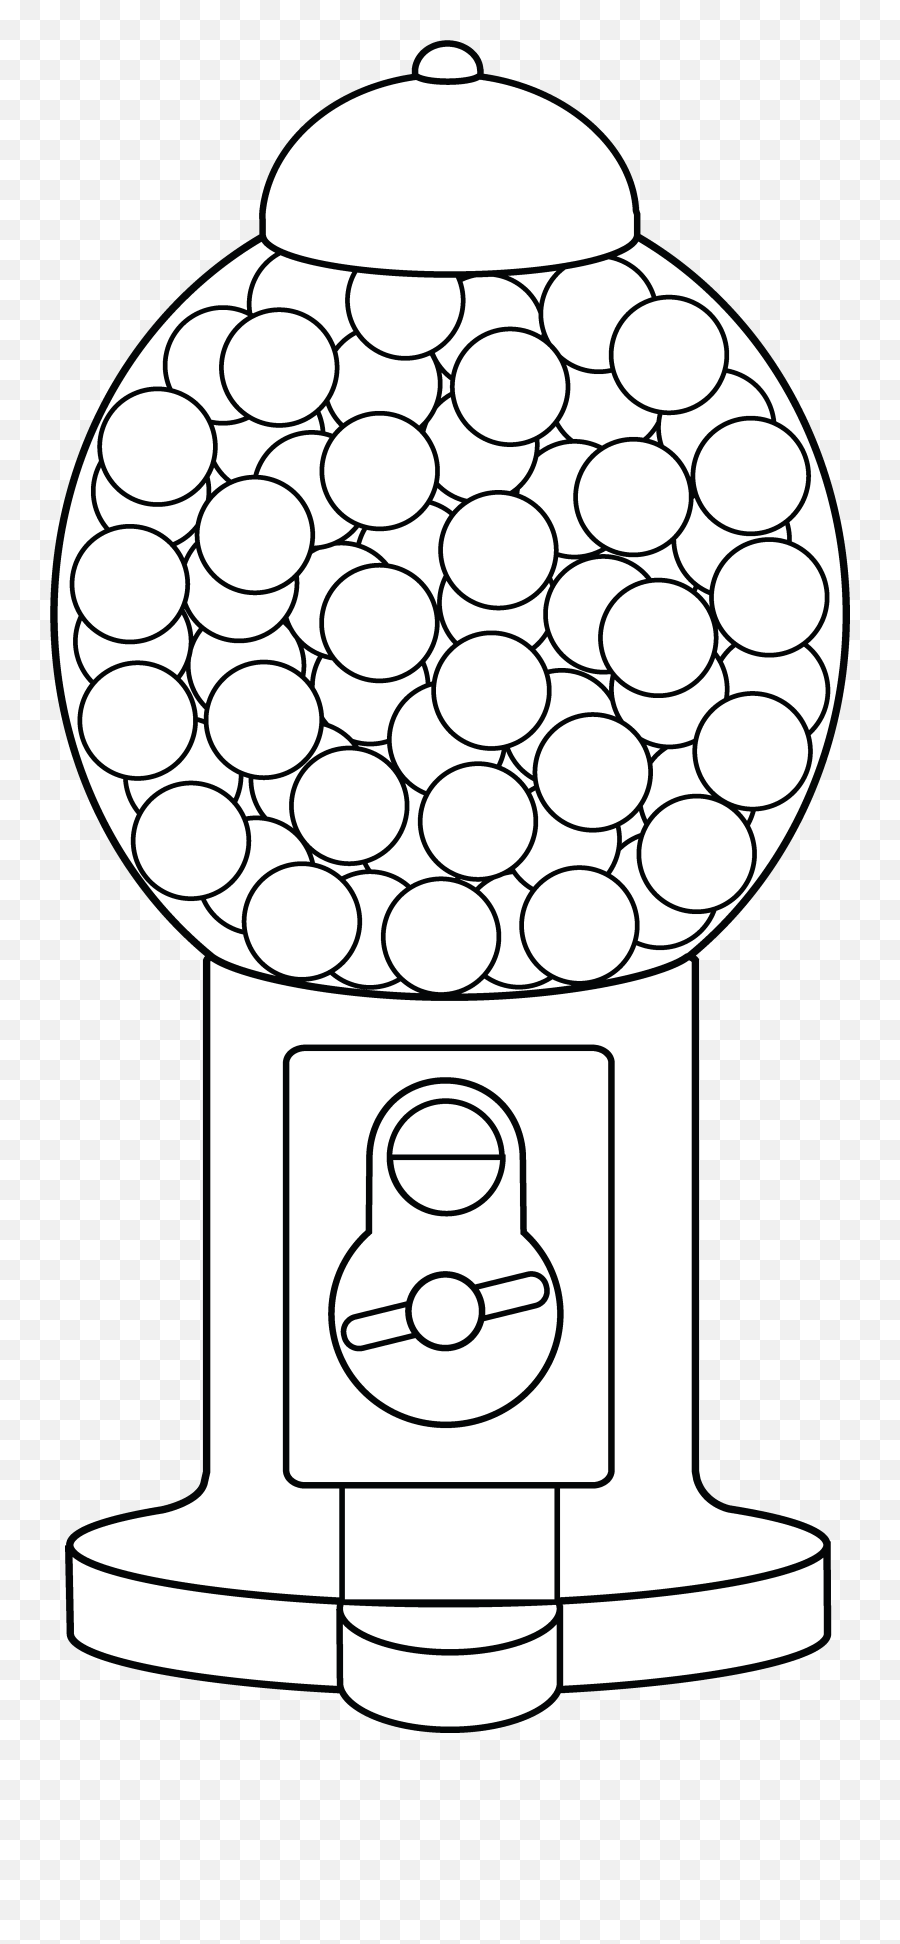 Gumball Machine Coloring Page - Free Cli 1589127 Png Bubble Gum Machine Coloring Page,Gumball Png